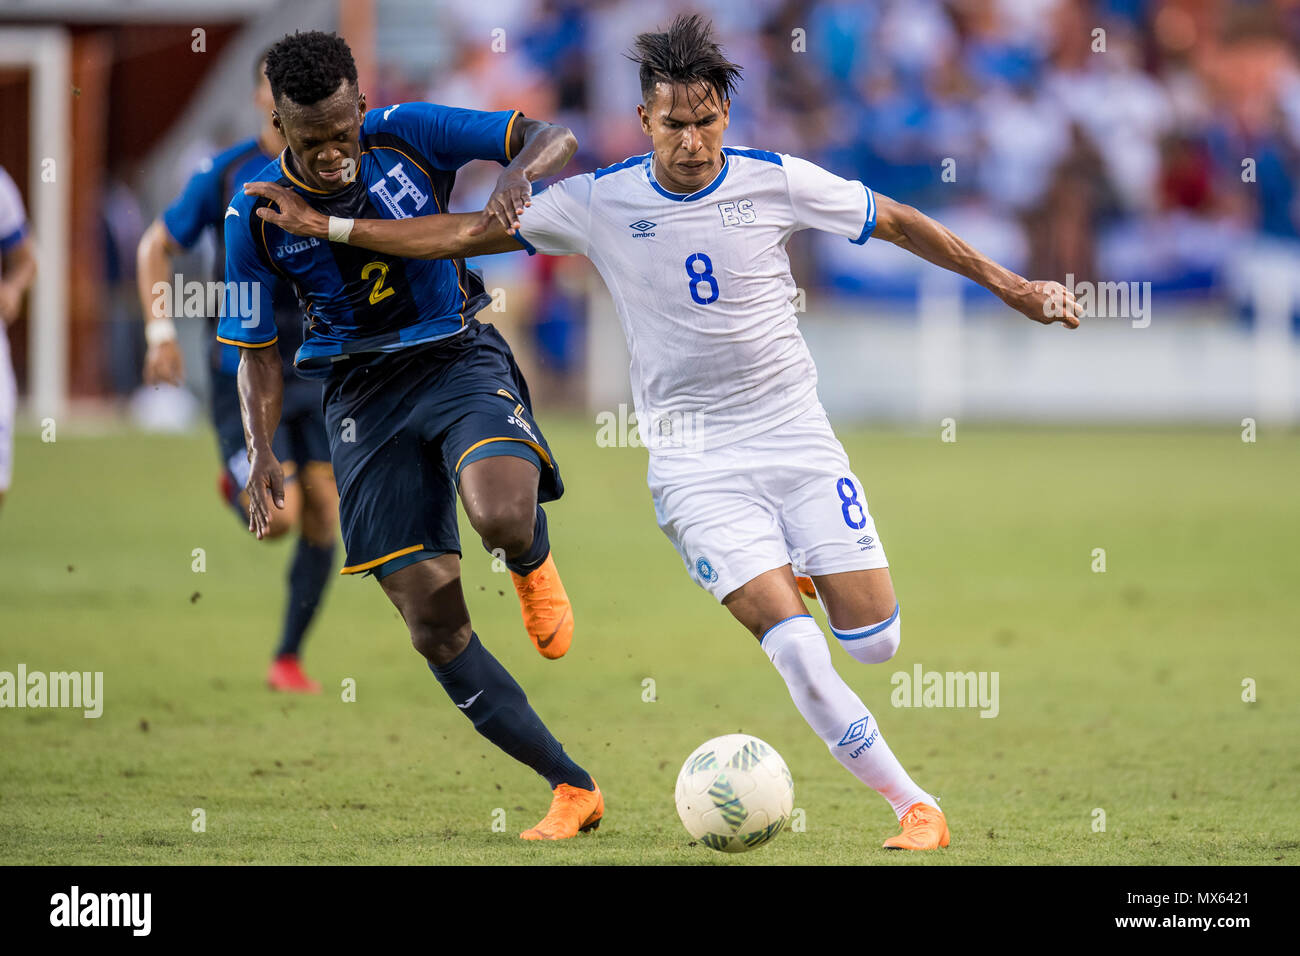 Houston, TX, USA. 2nd June, 2018. El Salvador midfielder Dennis Torres (8) controls the ball in front of Honduras defender Felix Crisanto (2) during an international soccer friendly match between Honduras and El Salvador at BBVA Compass Stadium in Houston, TX. El Salvador won the game 1 to 0.Trask Smith/CSM/Alamy Live News Stock Photo